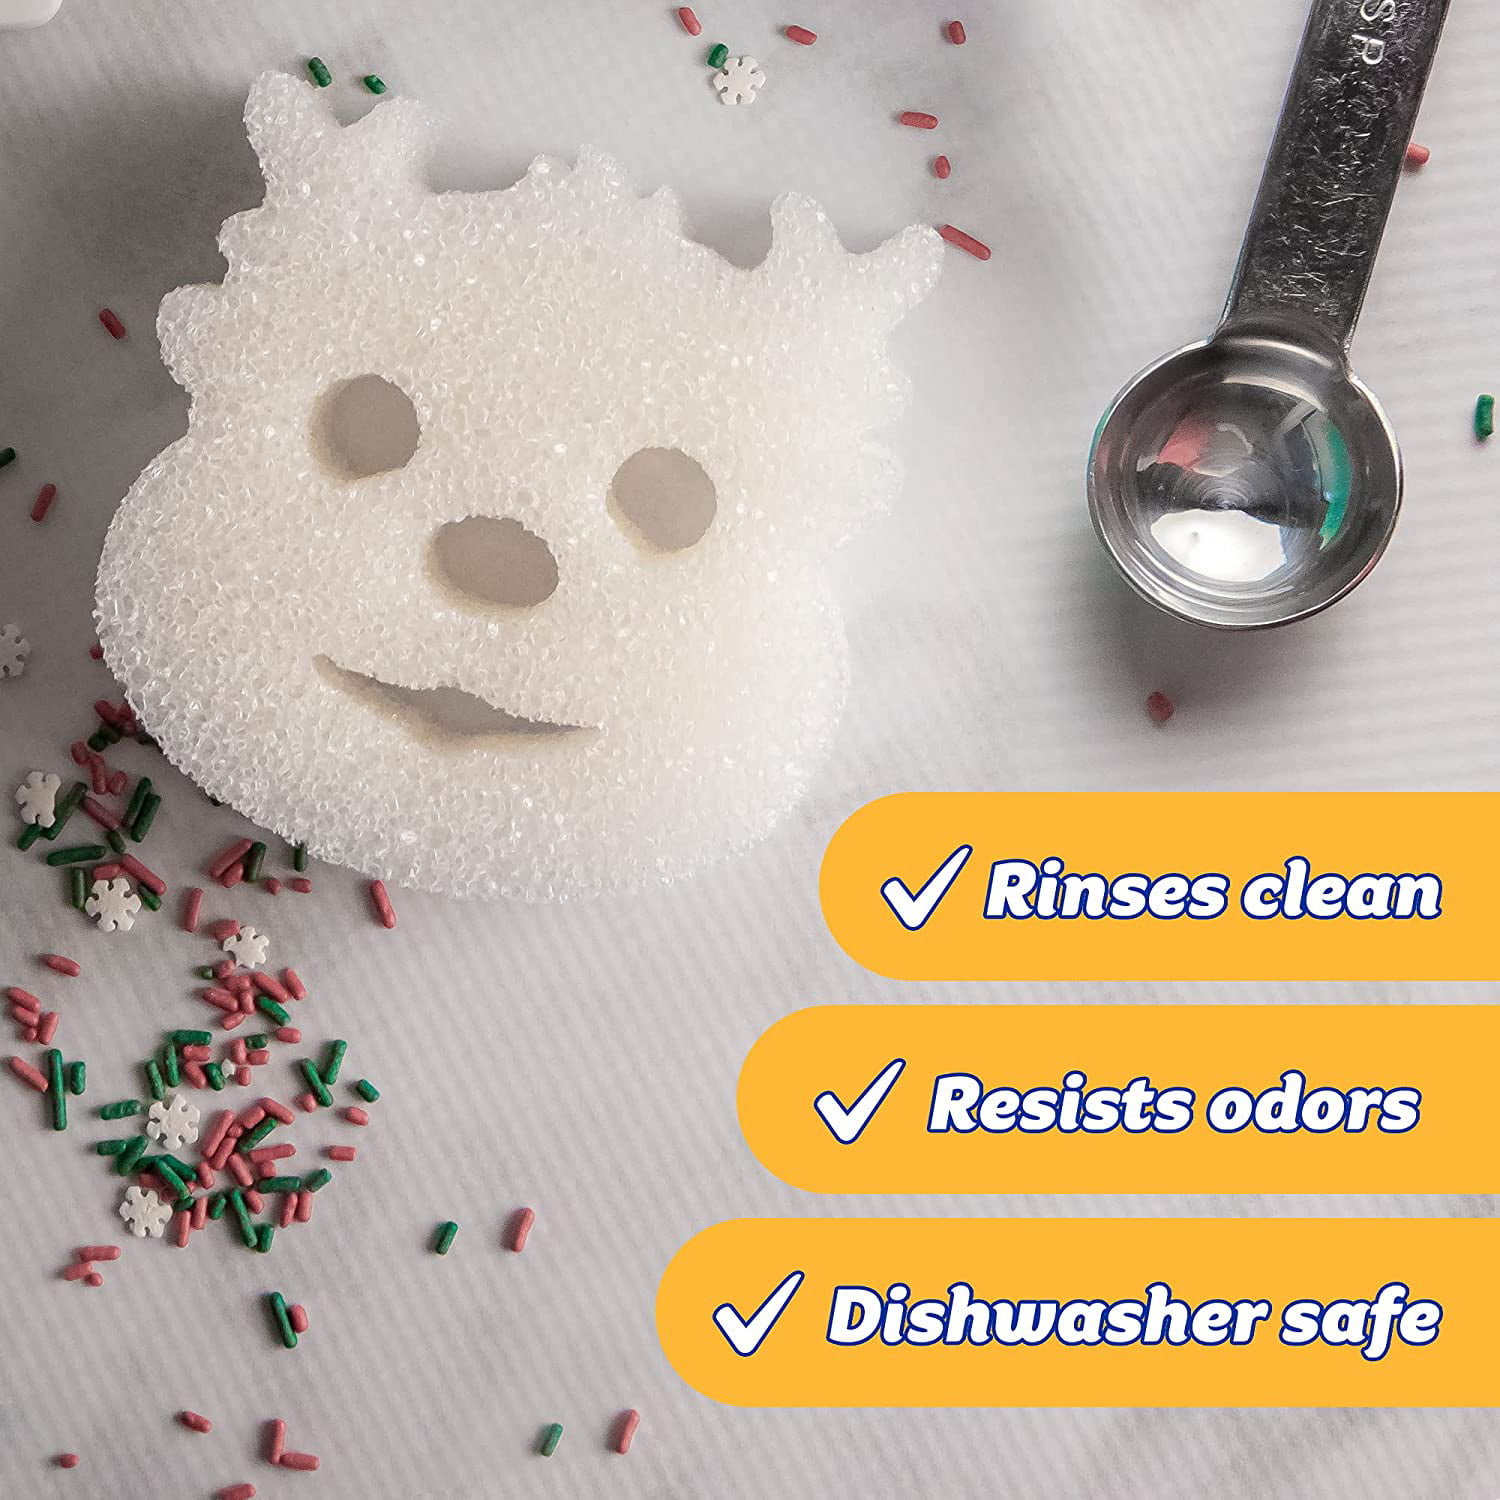 Scrub Daddy Holiday- Winter Shapes - 3 ct. Non Scratch Scrubbers